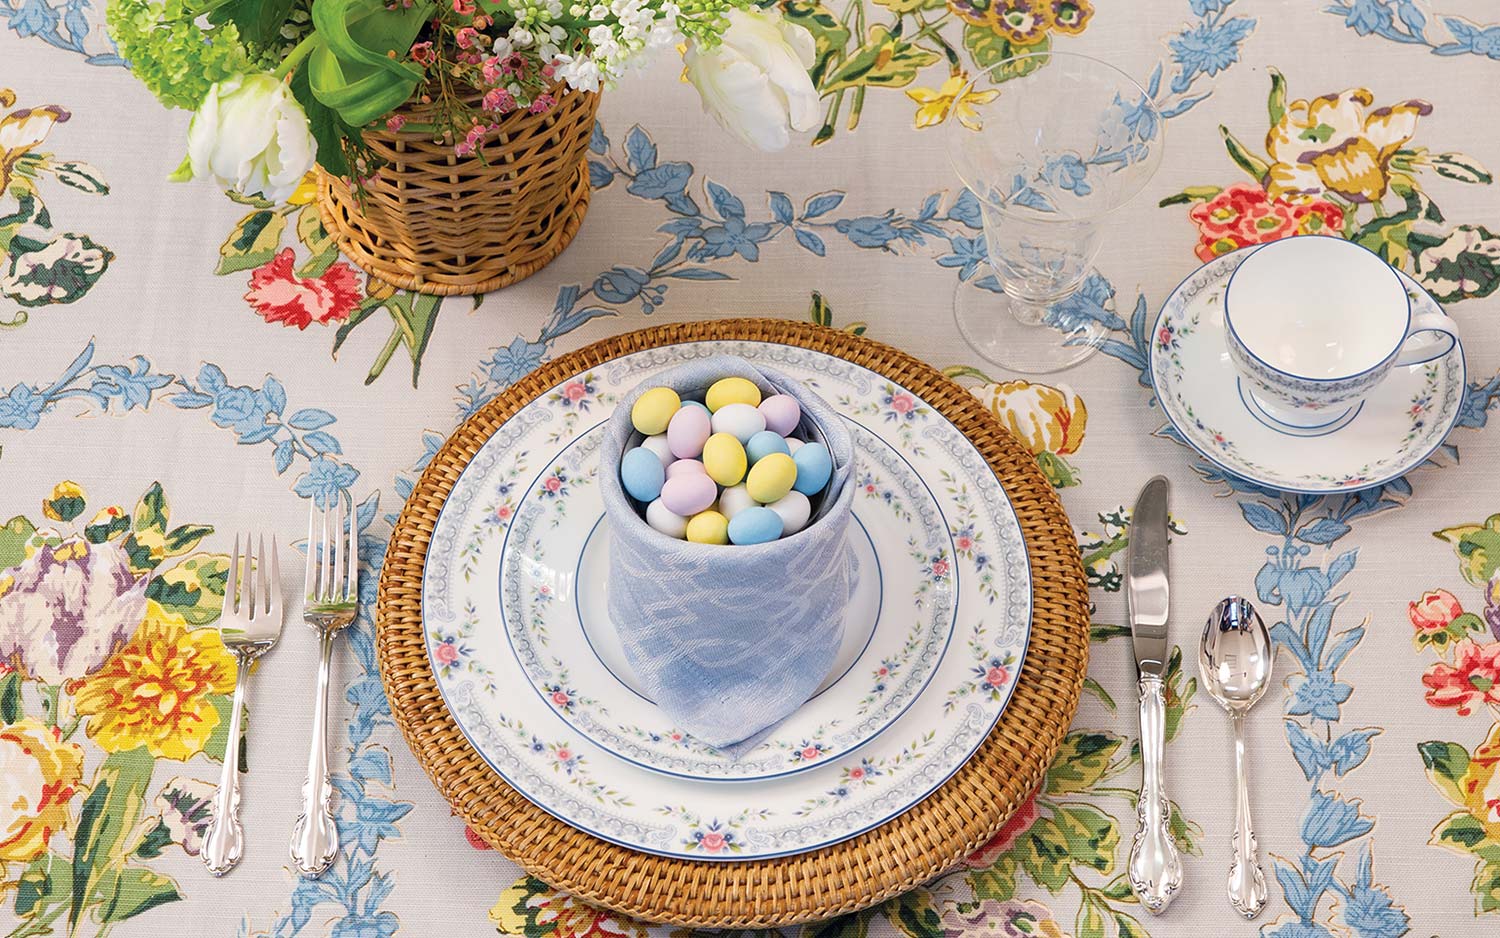 Floral tablecloth, woven place mat, china setting adorned with pink and blue flowers showcasing a cupful of pastel candies wrapped in a pale blue napkin